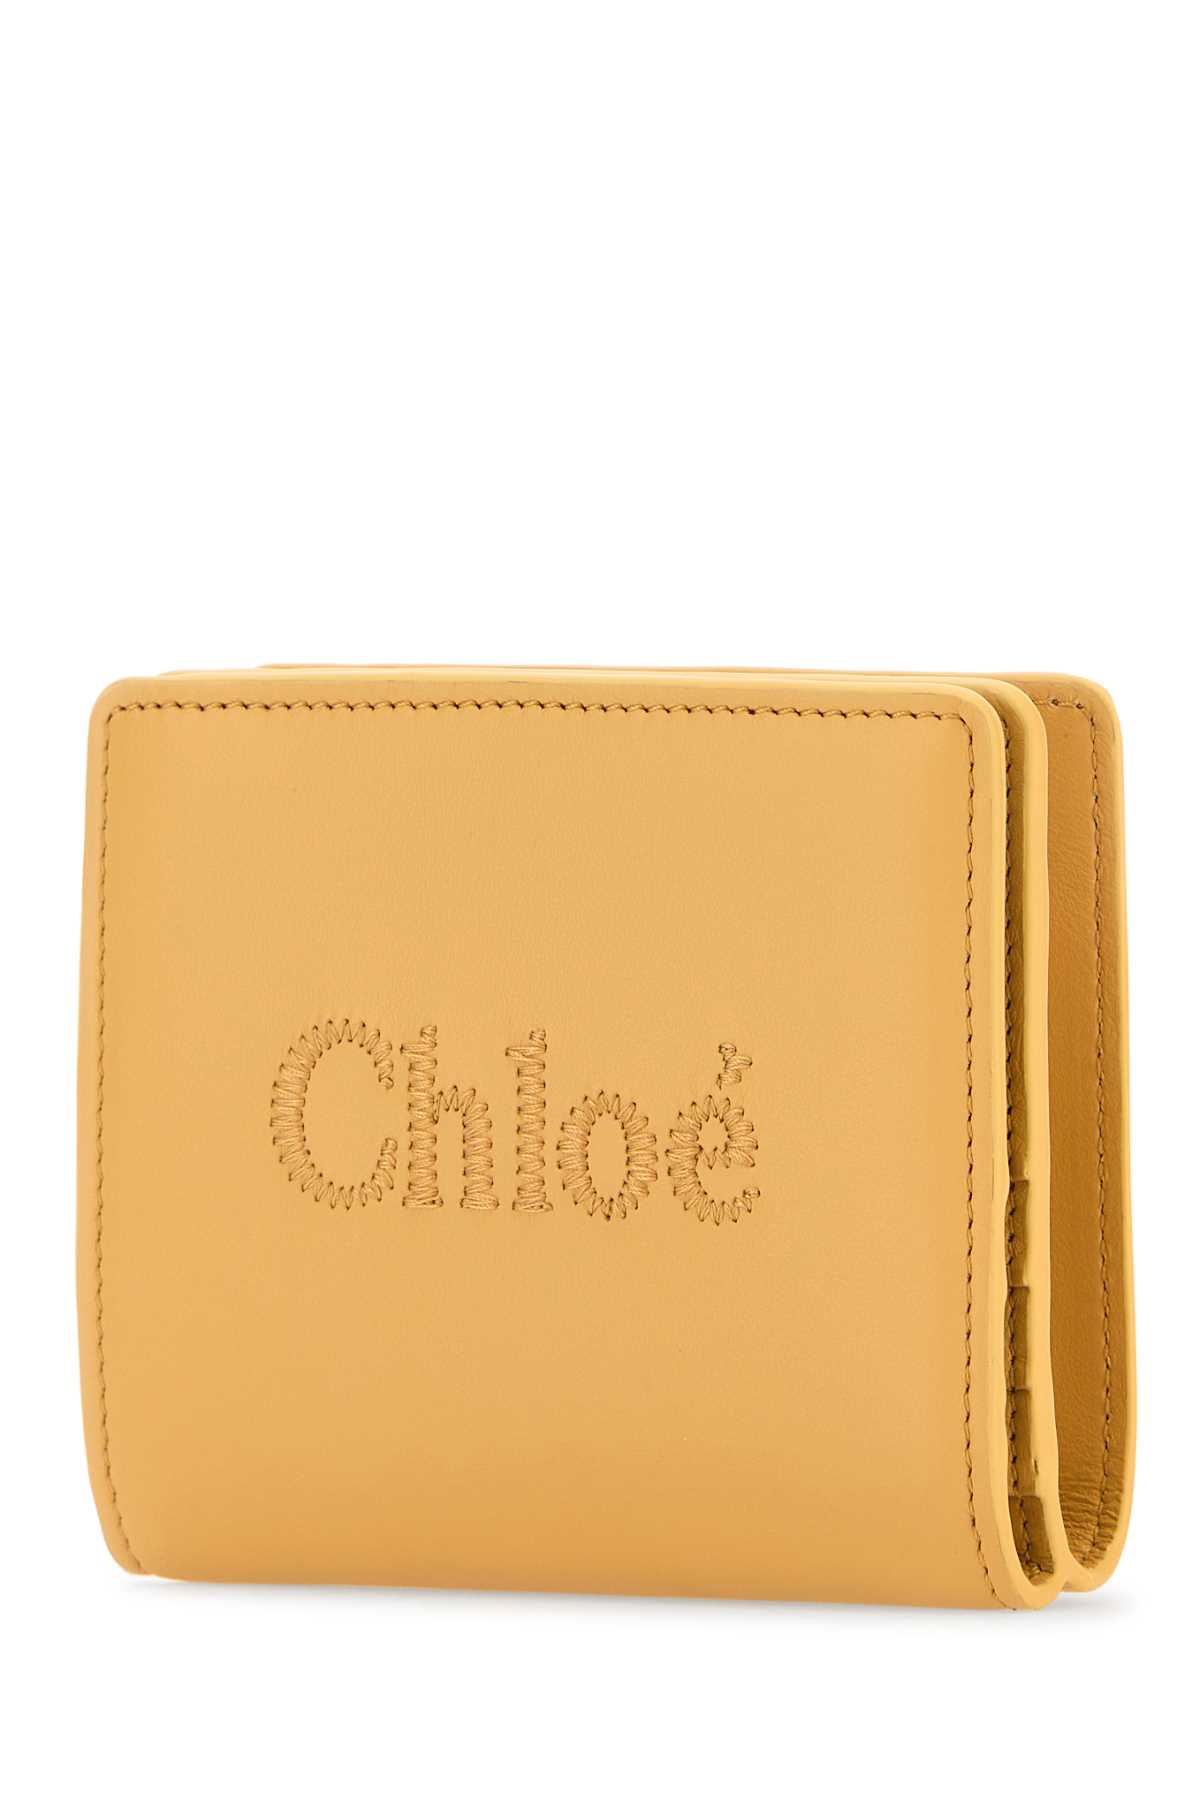 Shop Chloé Peach Leather Wallet In Honeygold